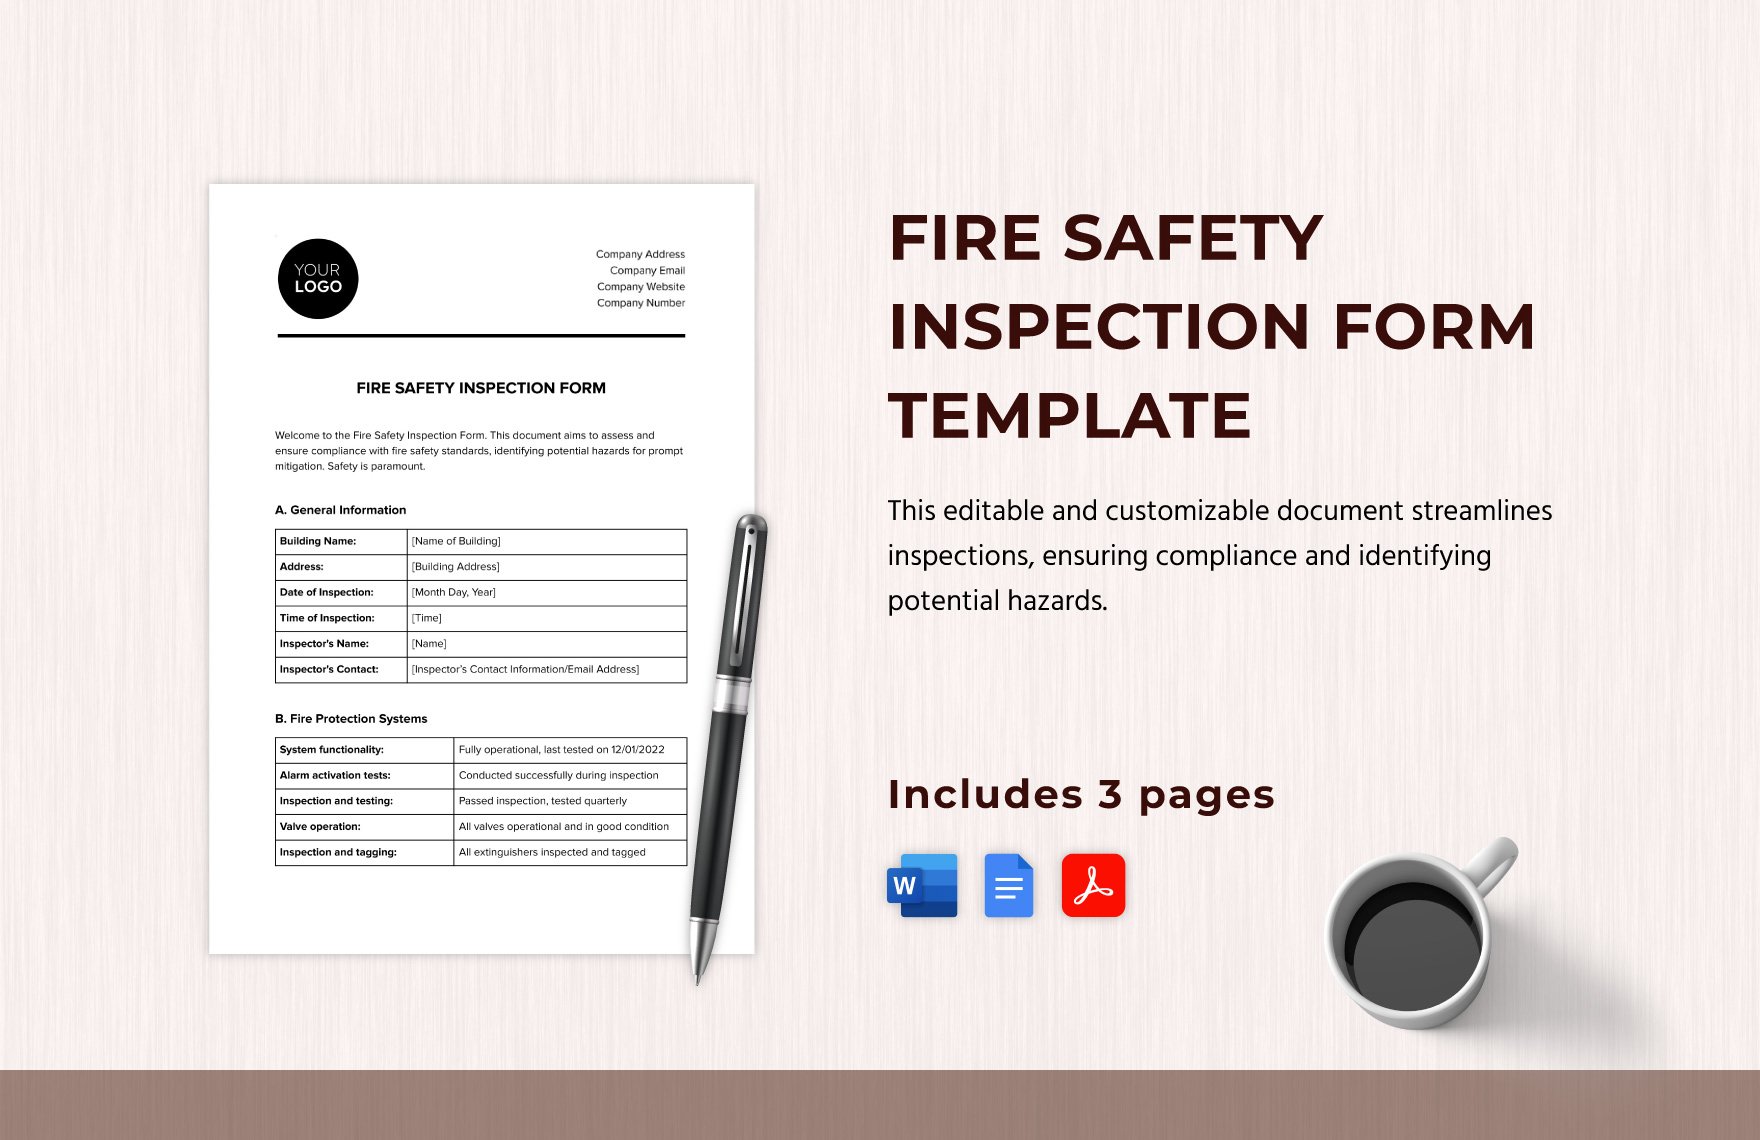 Fire Safety Inspection Form Template in Word, Google Docs, PDF